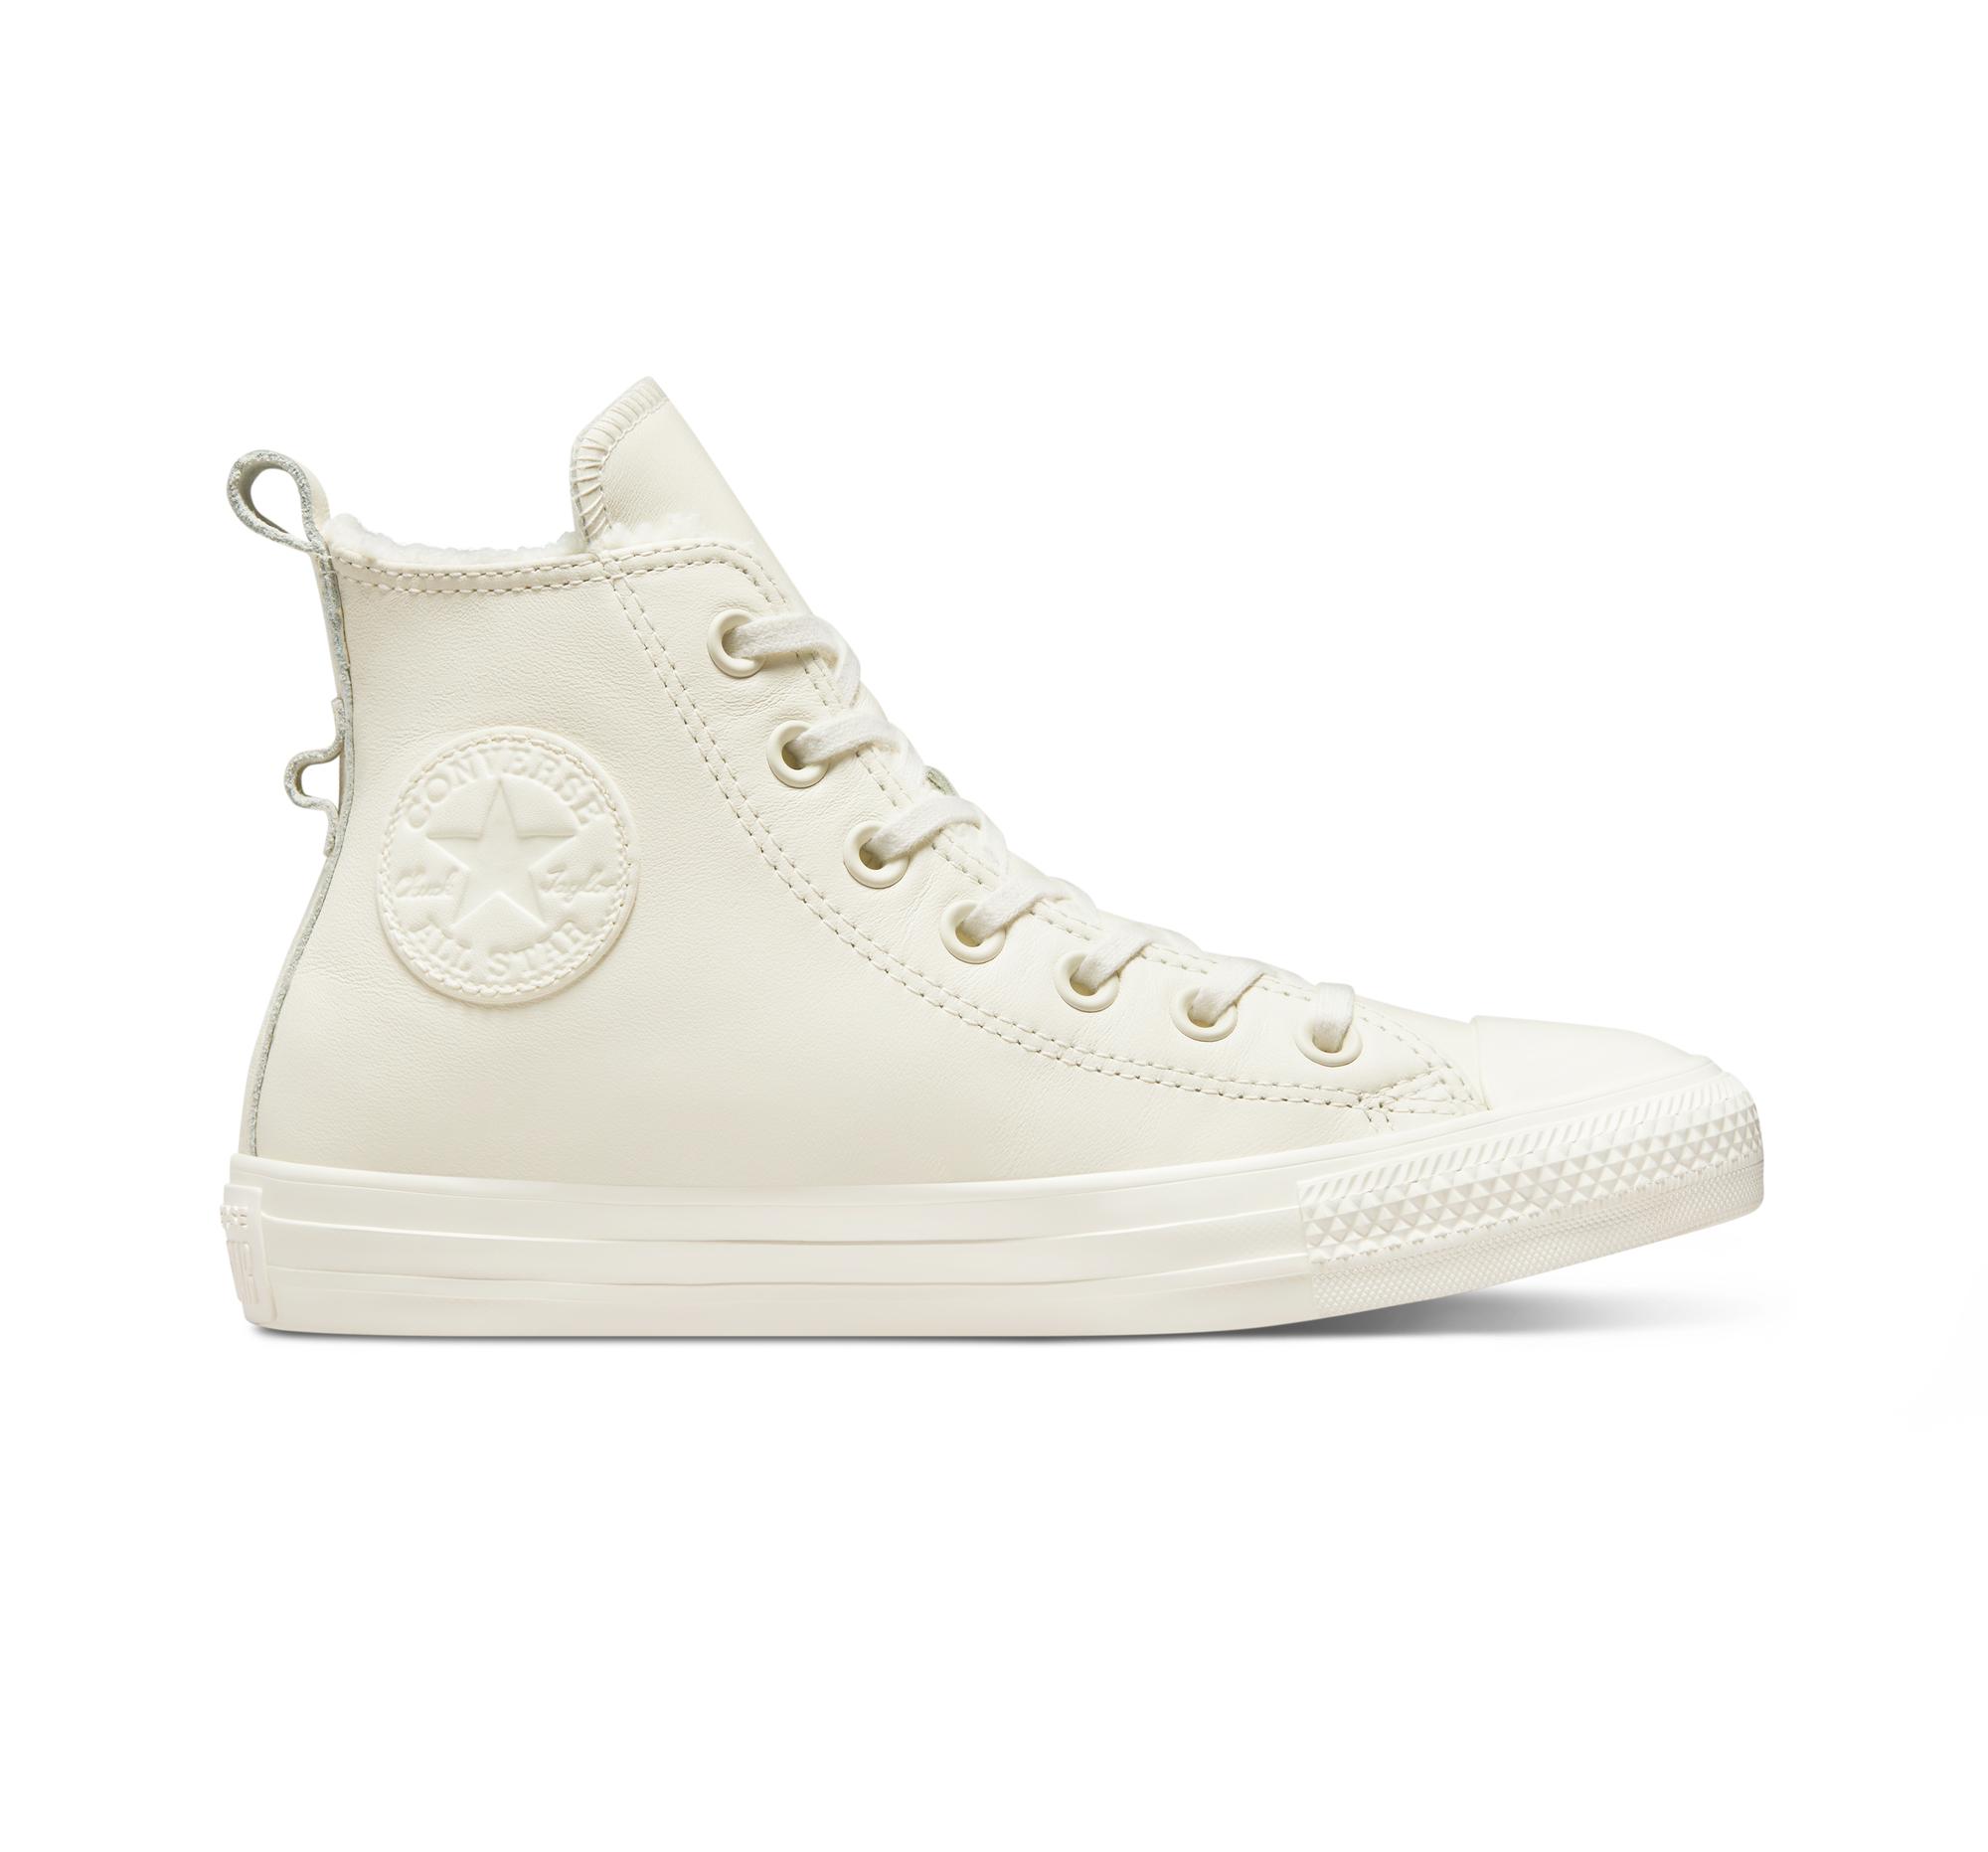 Converse Chuck Taylor All Star Lined Leather in White | Lyst